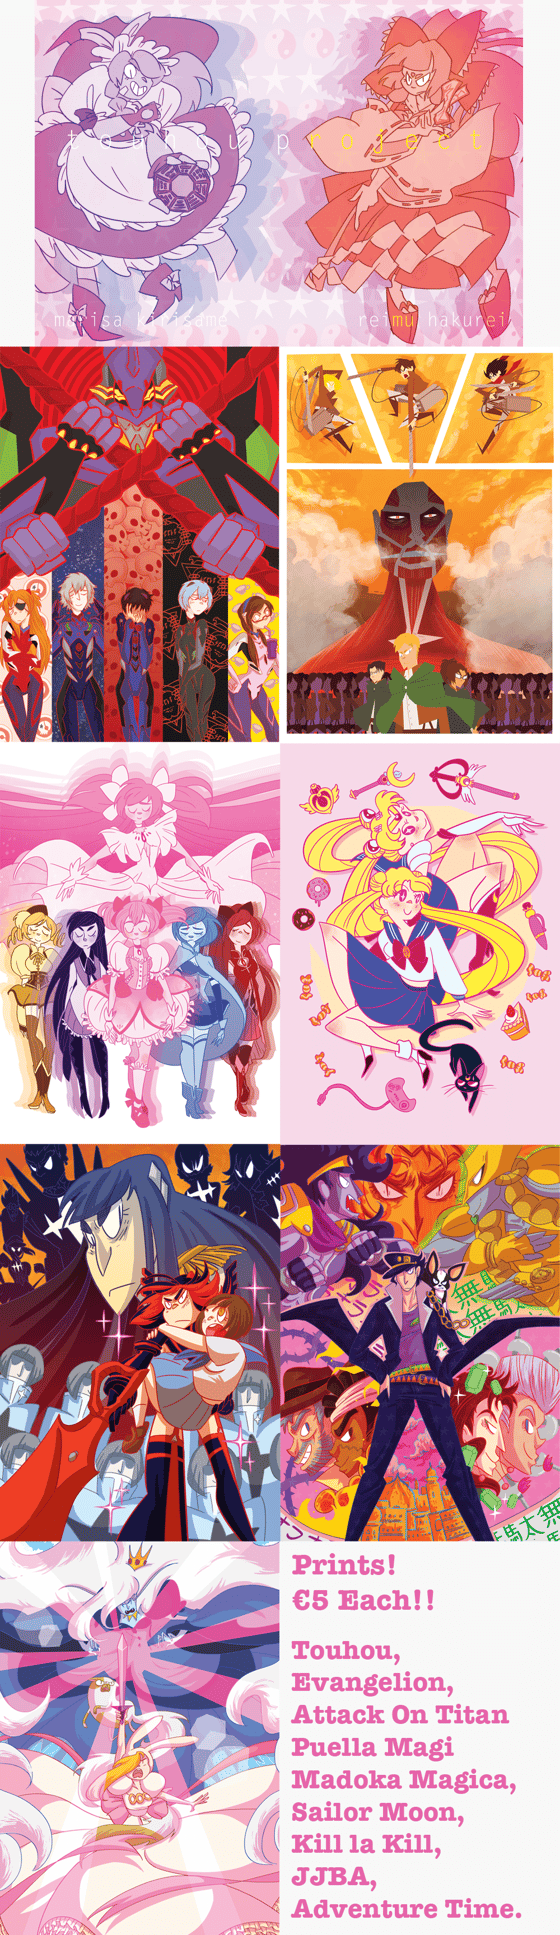 Image of Prints! Evangelion, Attack On Titan, PMMM + many more